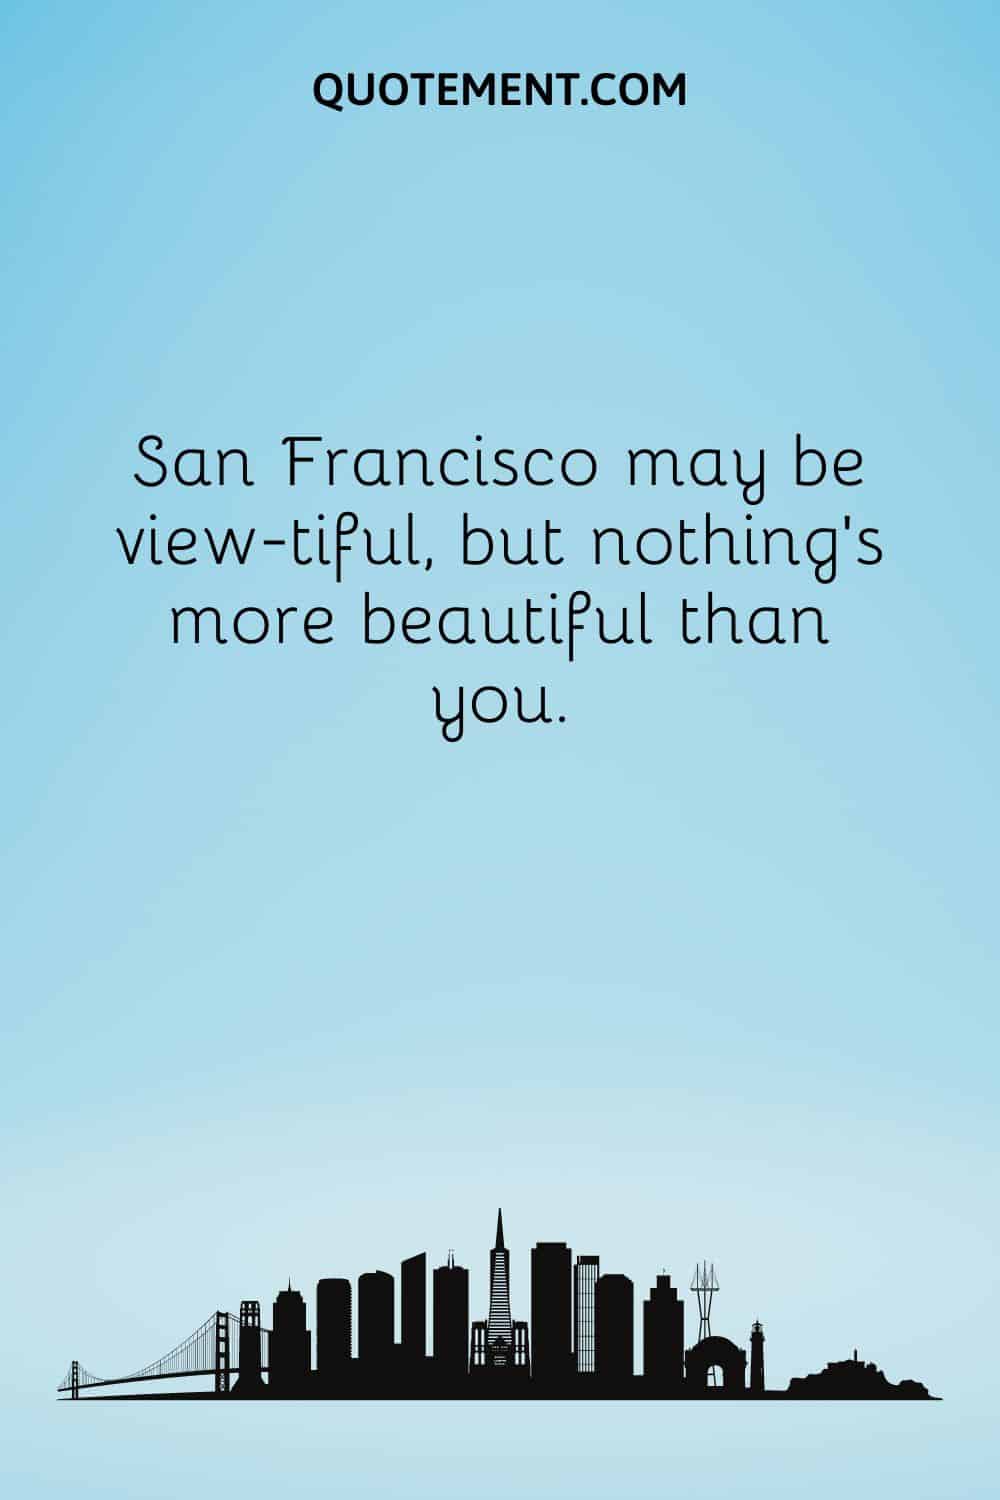  San Francisco may be view-tiful, but nothing’s more beautiful than you.